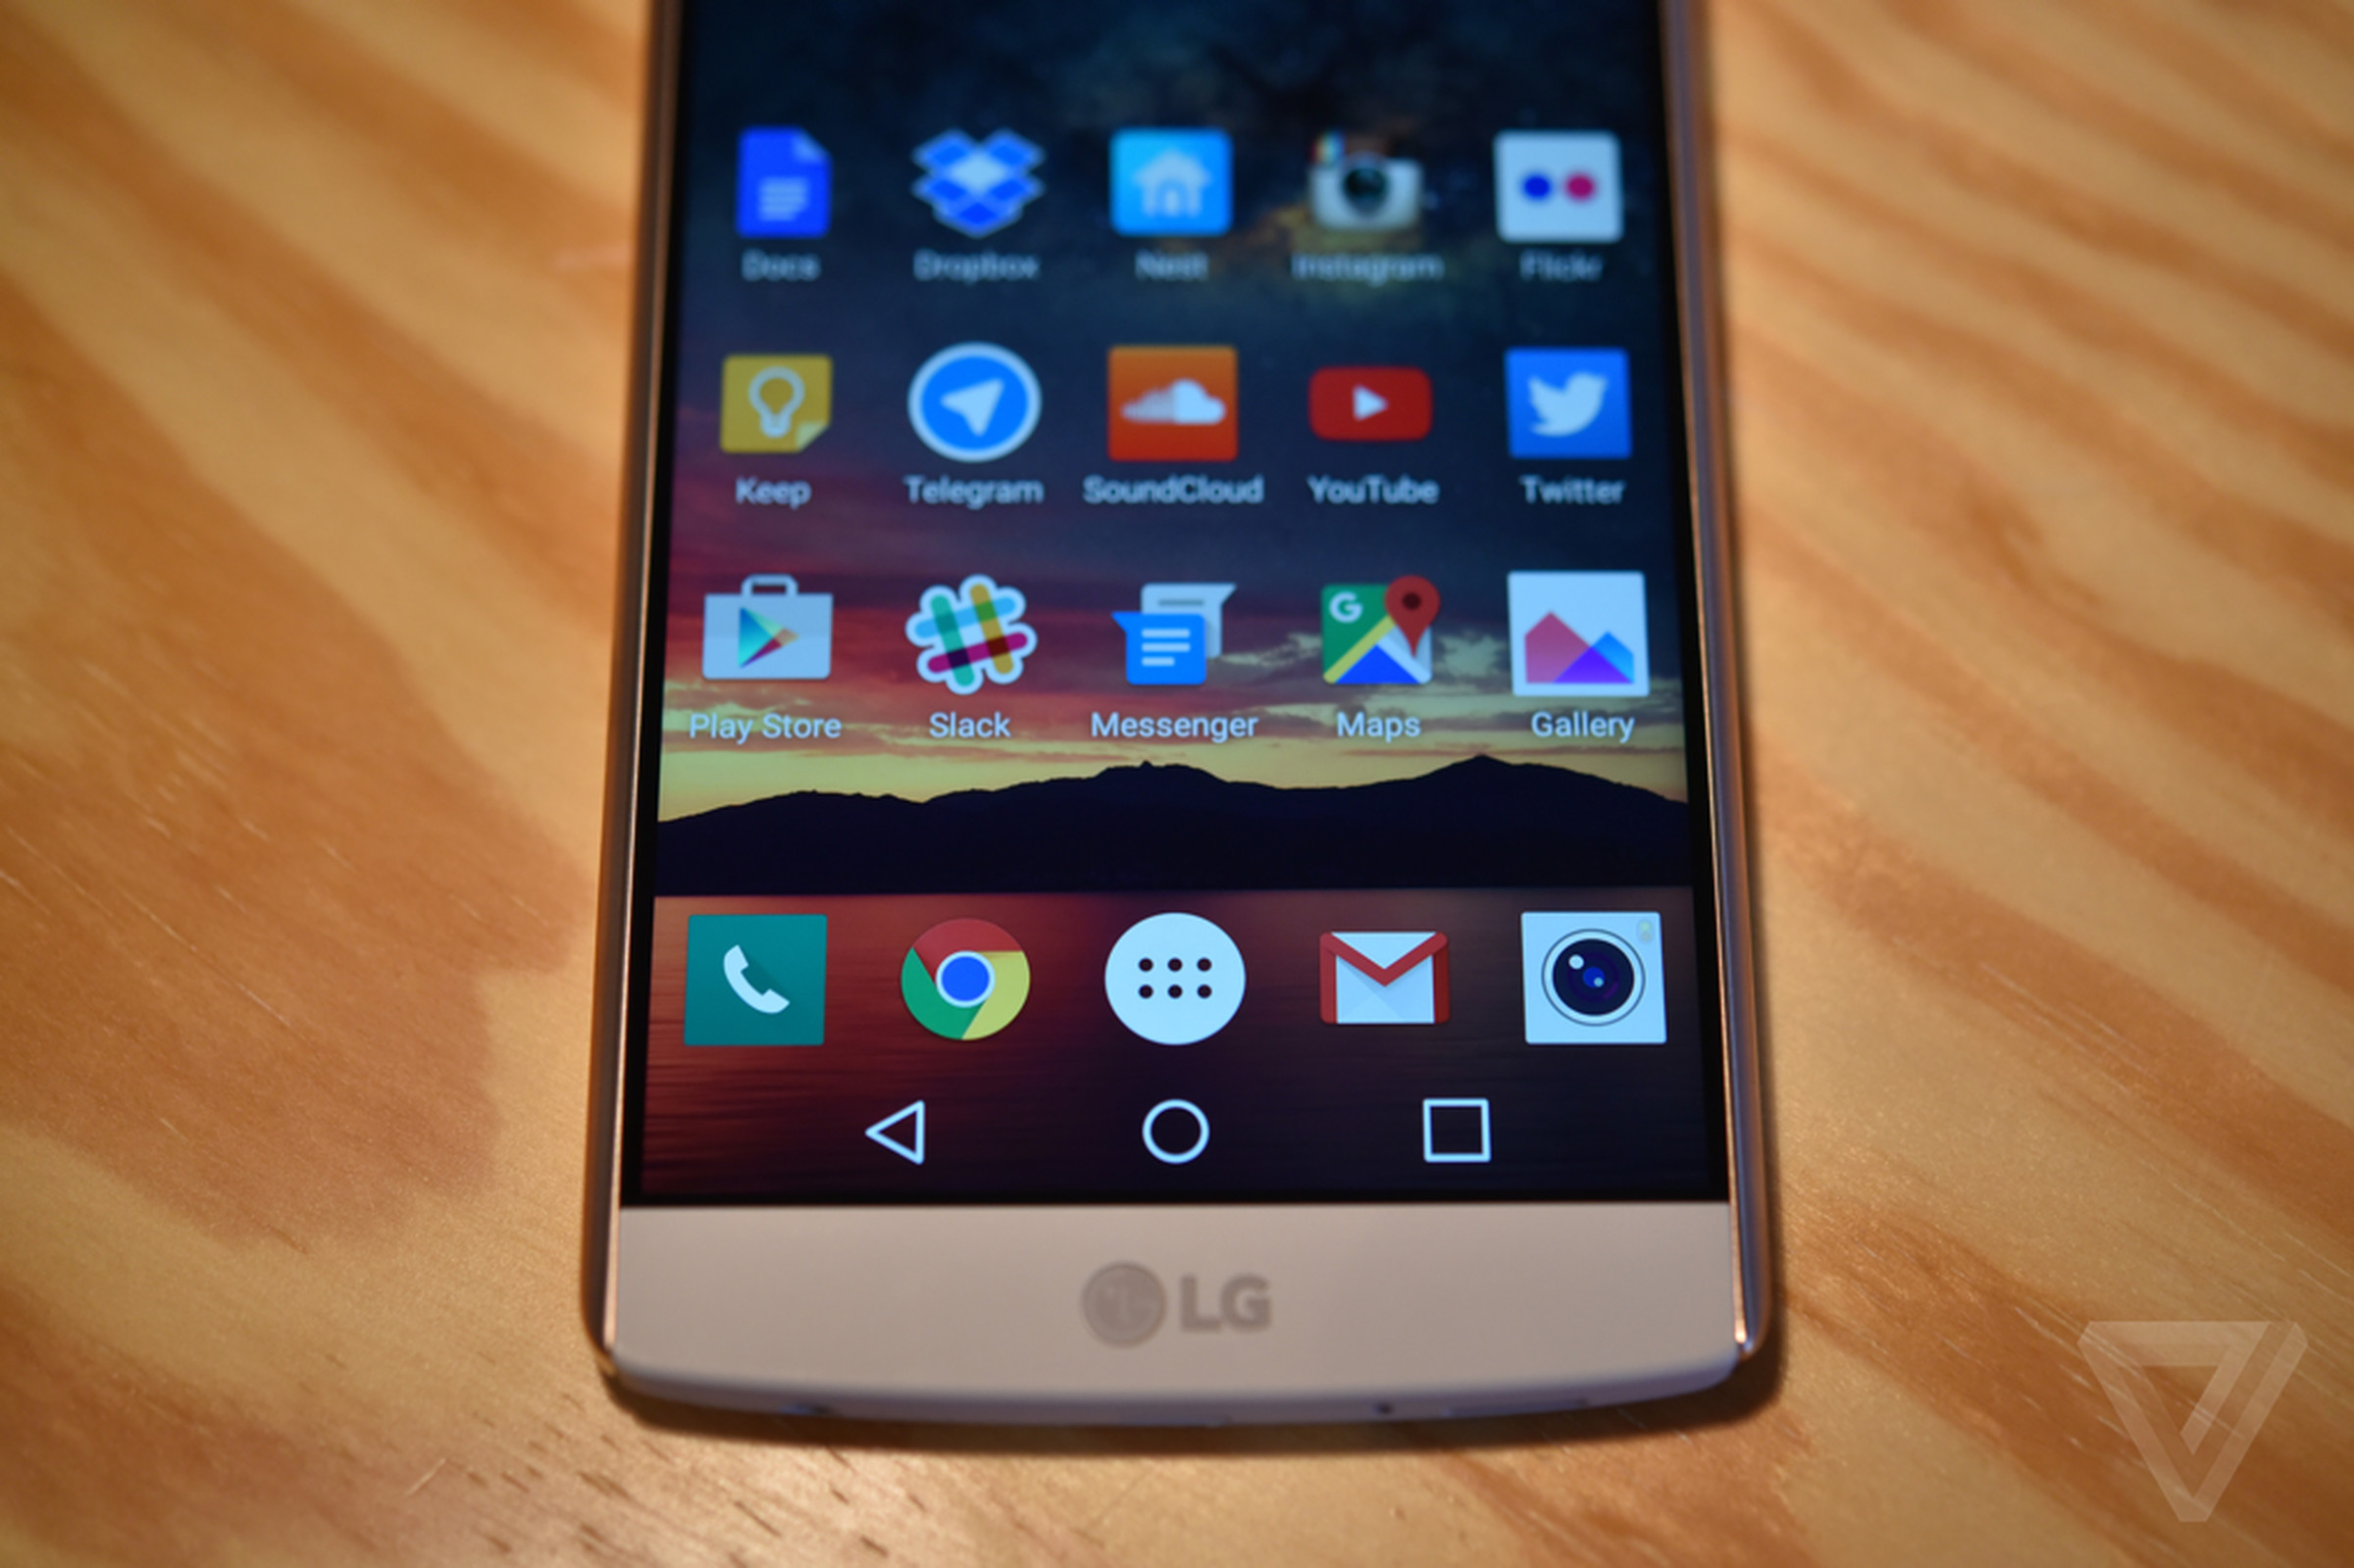 LG V10 hands-on review photos